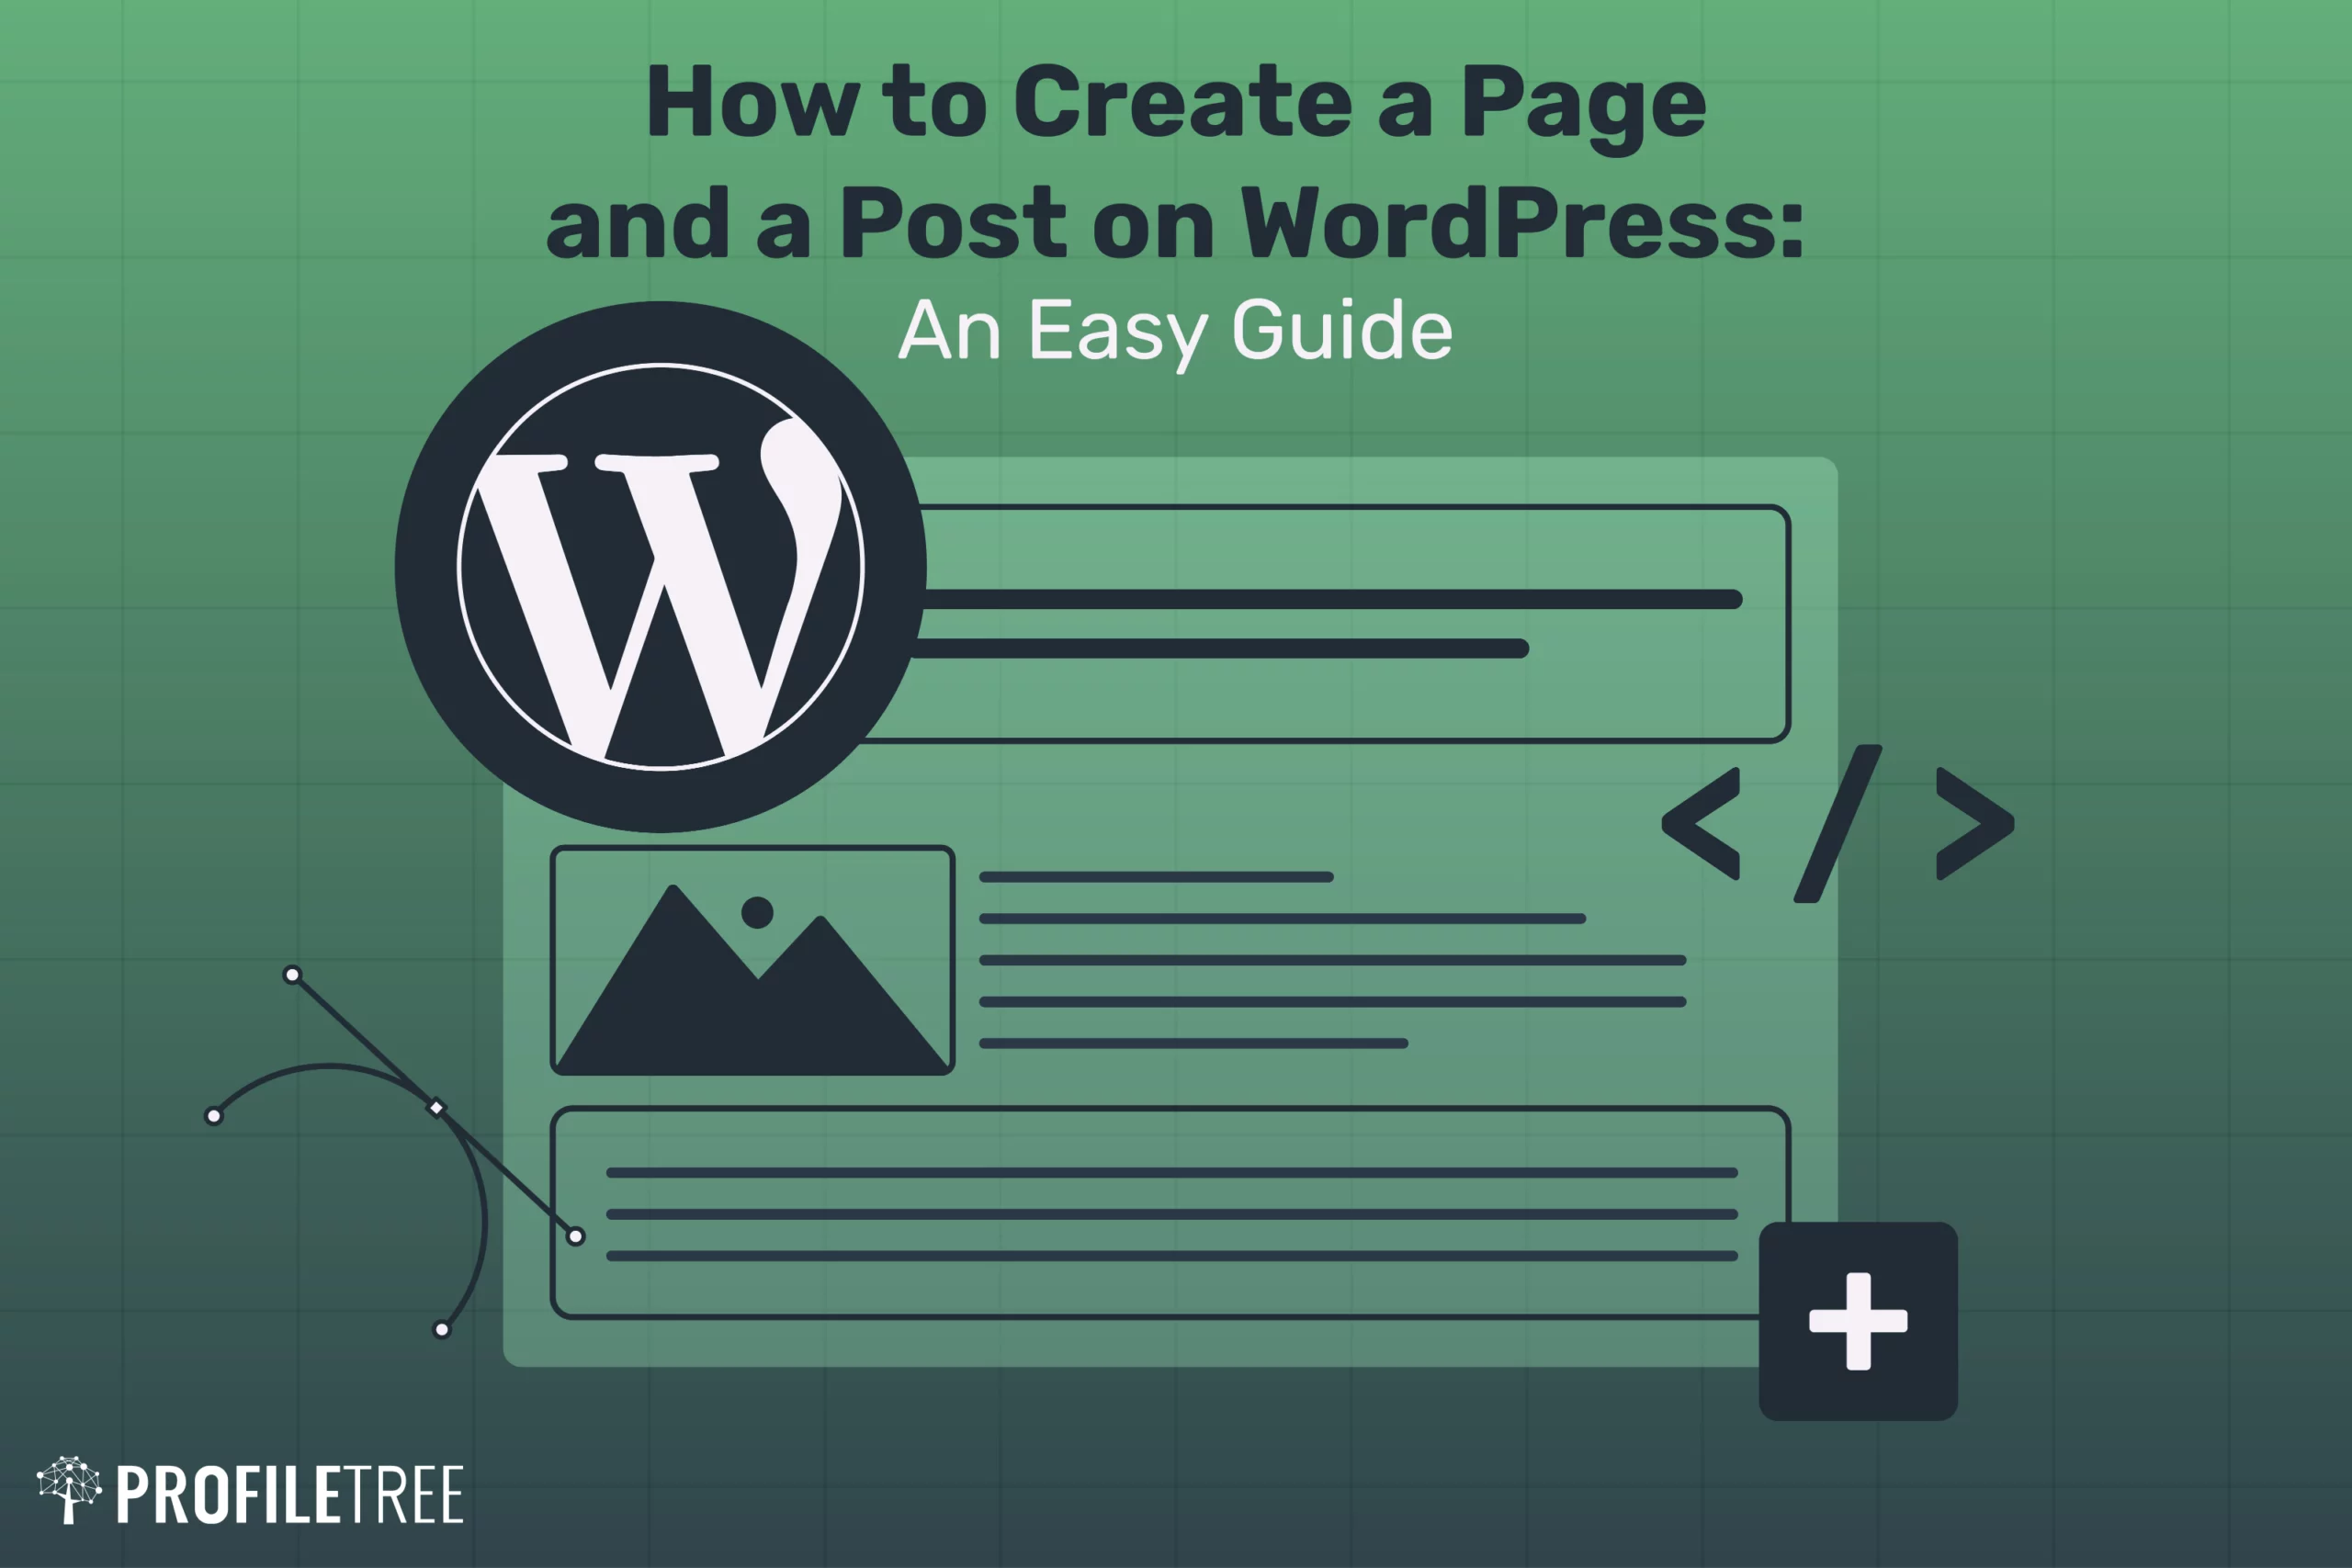 How to Create a Page and a Post on WordPress An Easy Guide